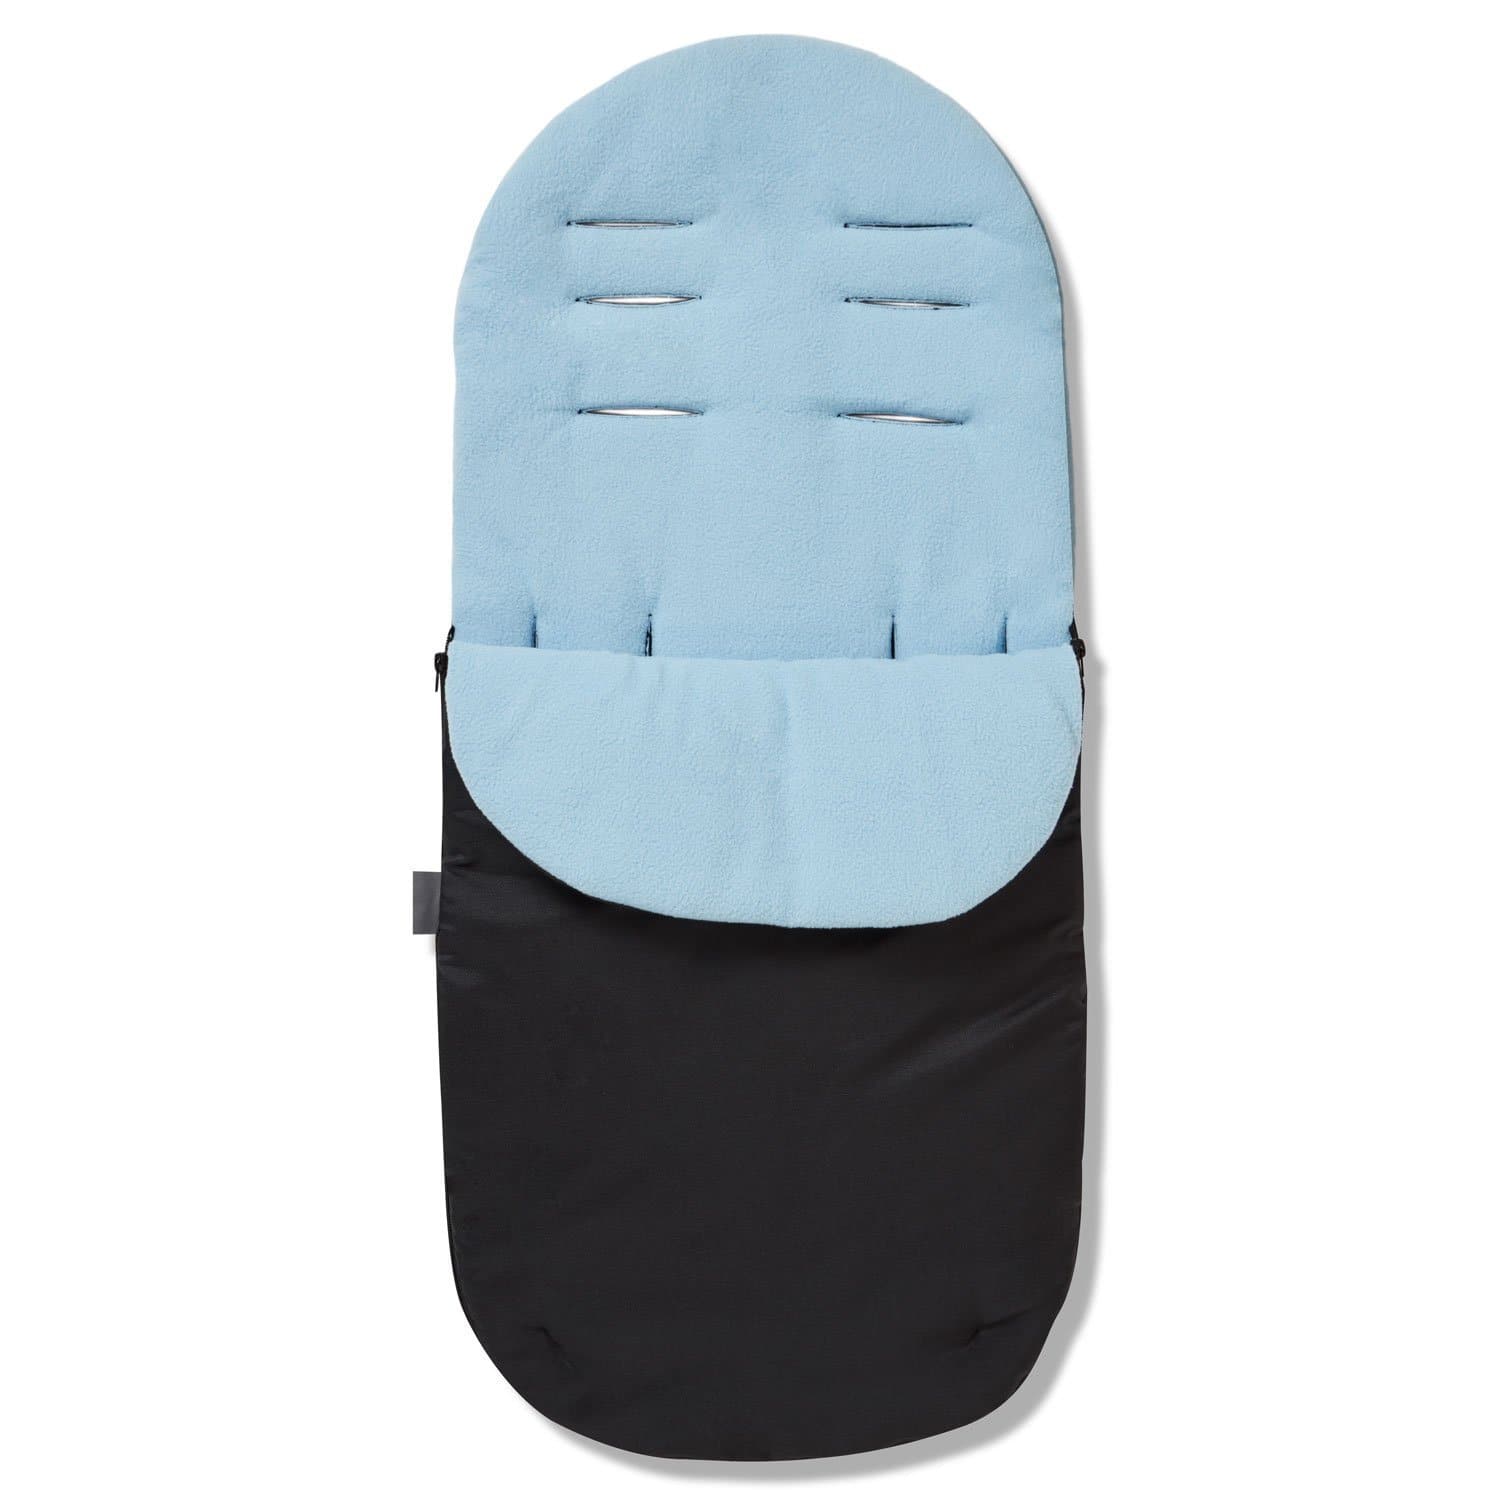 Footmuff / Cosy Toes Compatible with Greentom - Light Blue / Fits All Models | For Your Little One